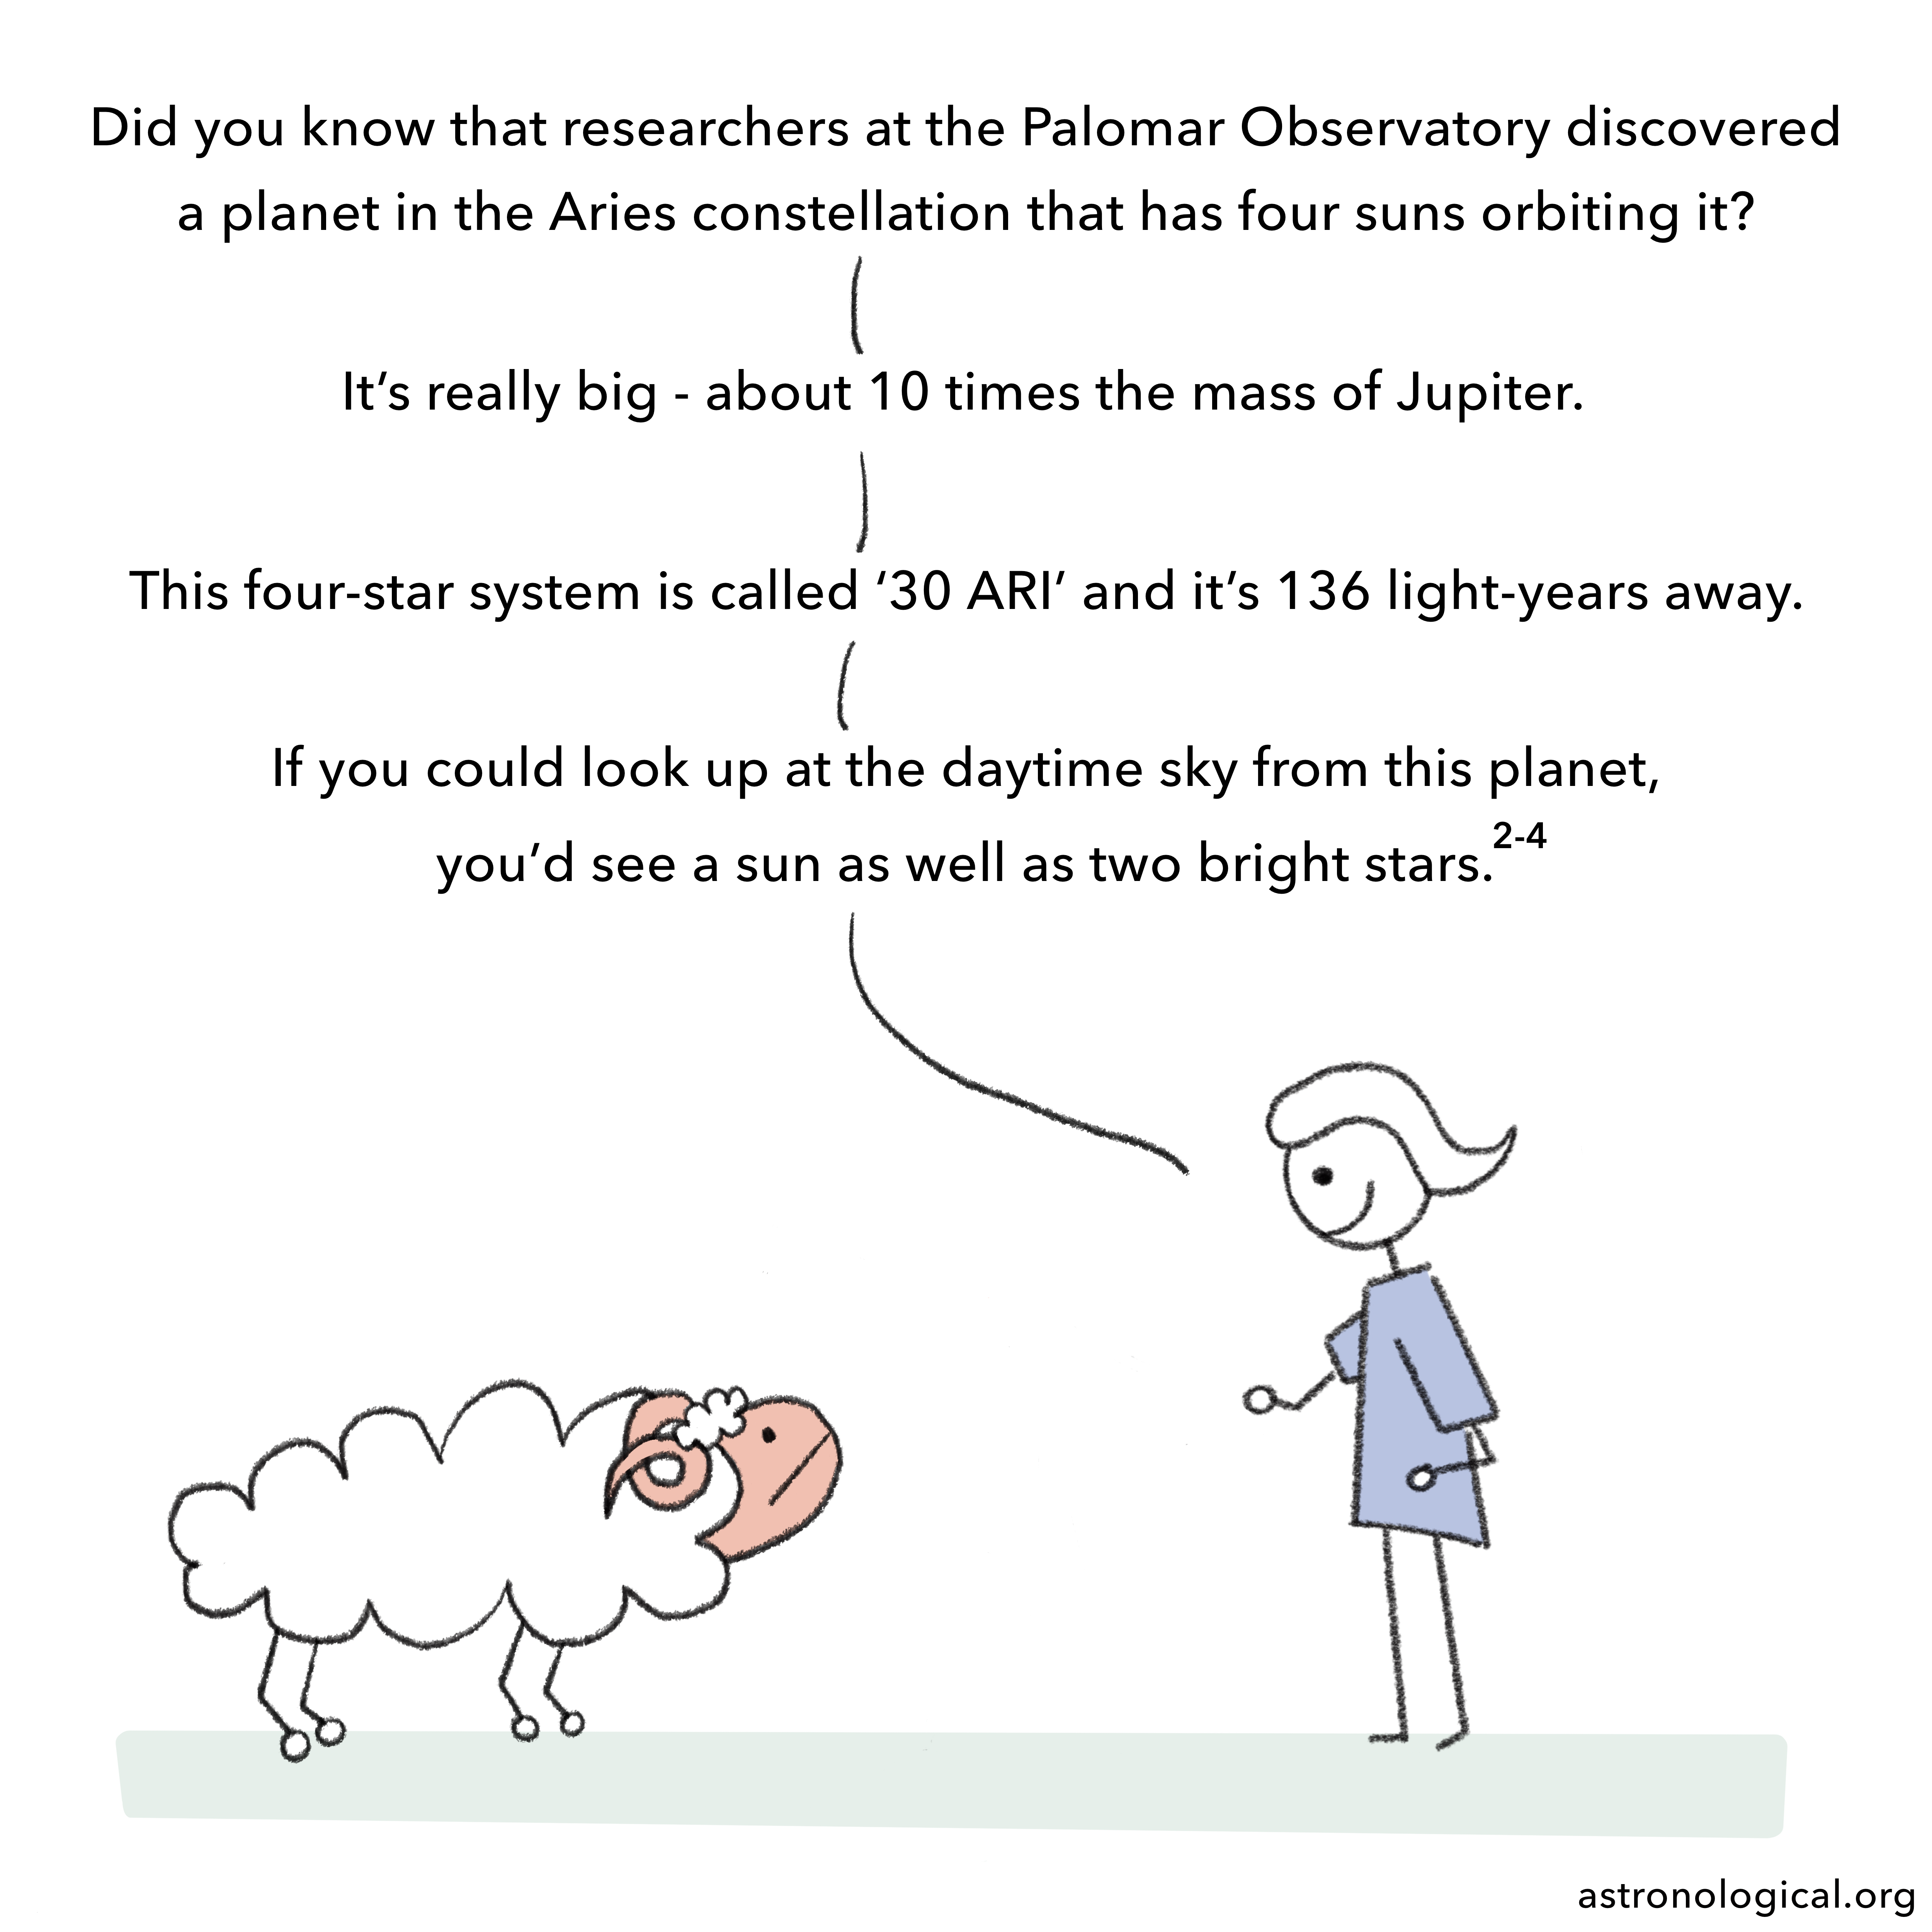 The girl replies to the ram enthusiastically: Did you know that researchers at the Palomar Observatory discovered a planet in the Aries constellation that has four suns orbiting it? It’s really big - about 10 times the mass of Jupiter. This four-star system is called ‘30 ARI’ and it’s 136 light-years away. If you could look up at the daytime sky from this planet, you’d see a sun as well as two bright stars.